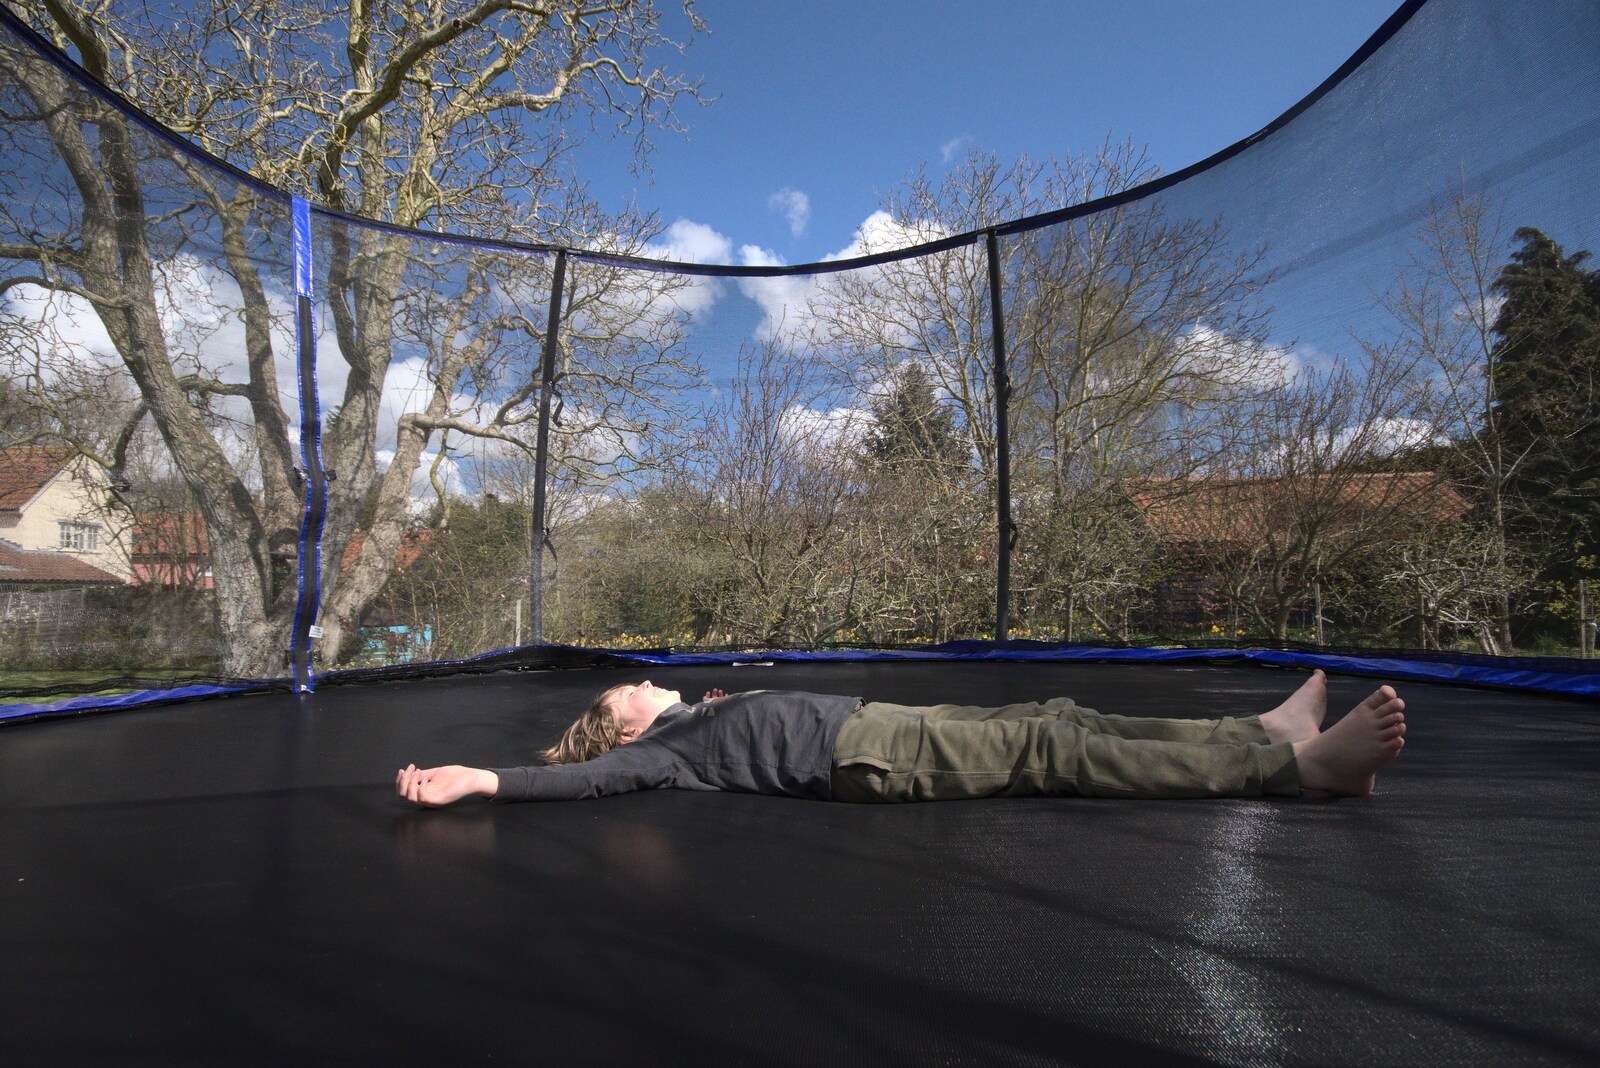 Time for a bit of a lie down from Roadworks and Harry's Trampoline, Brome, Suffolk - 6th April 2021